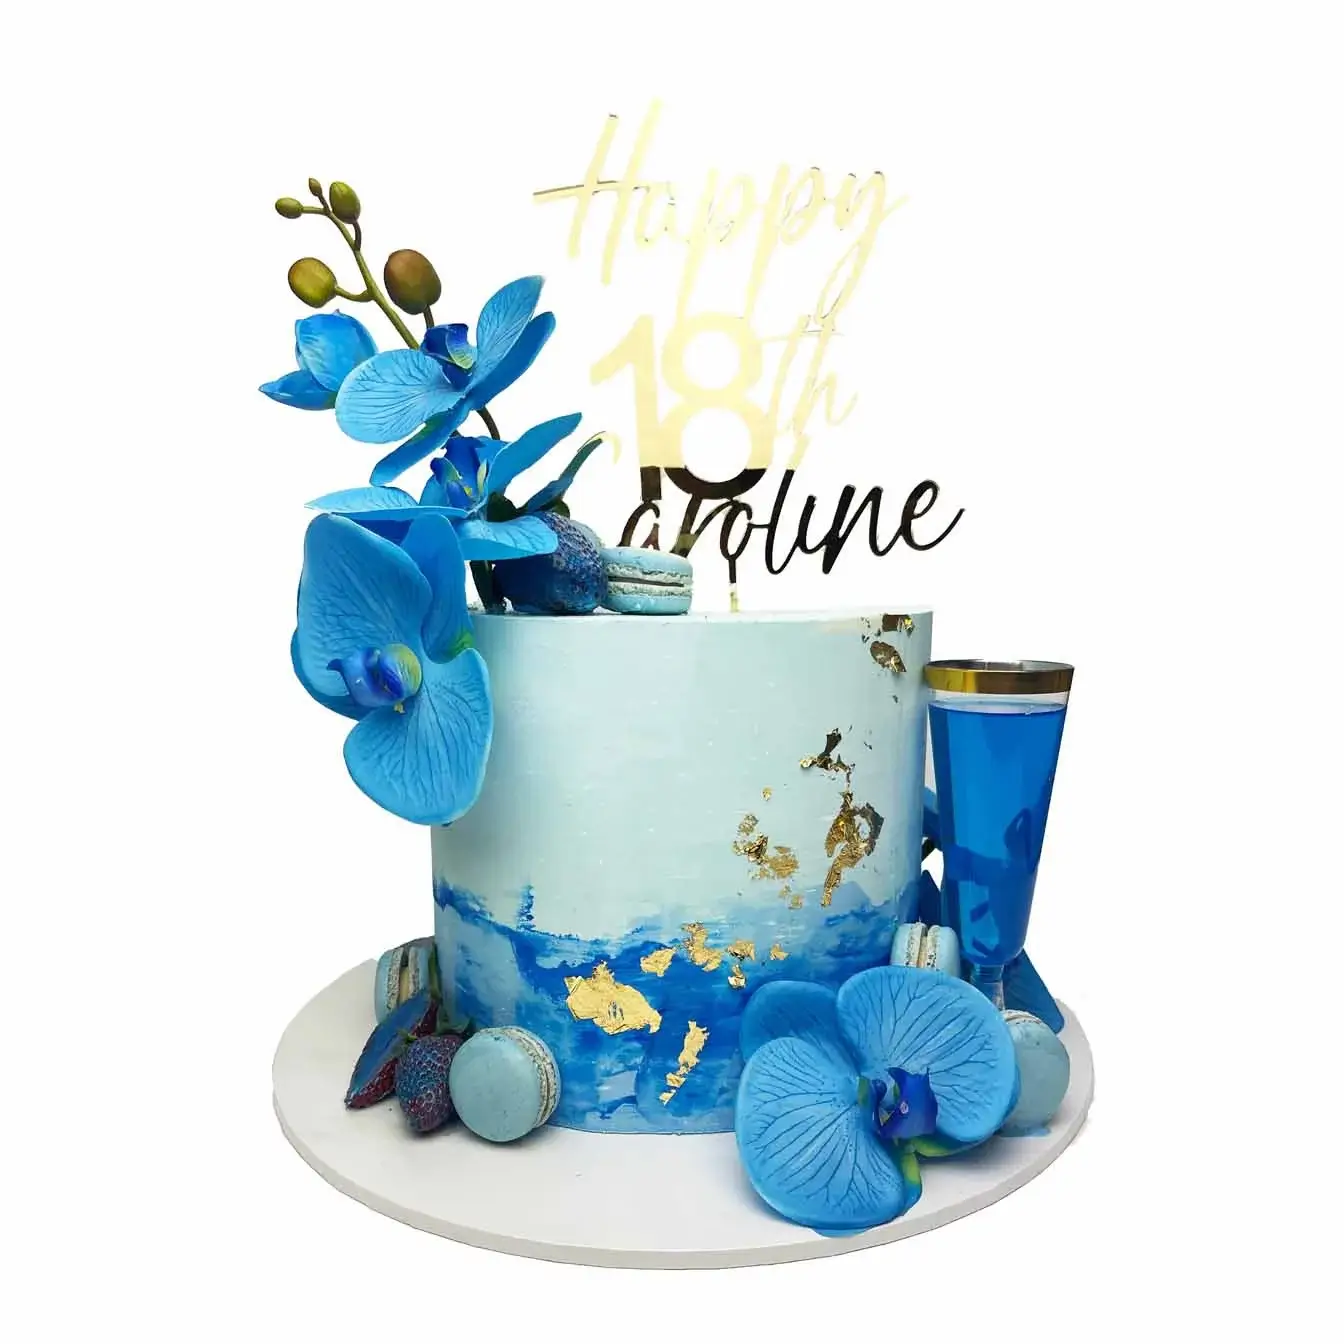 Blue Aloha Bliss Cake - A tropical-themed cake with blue orchids and a delightful surprise of a blue jelly cocktail, a perfect centerpiece for events filled with the spirit of aloha.